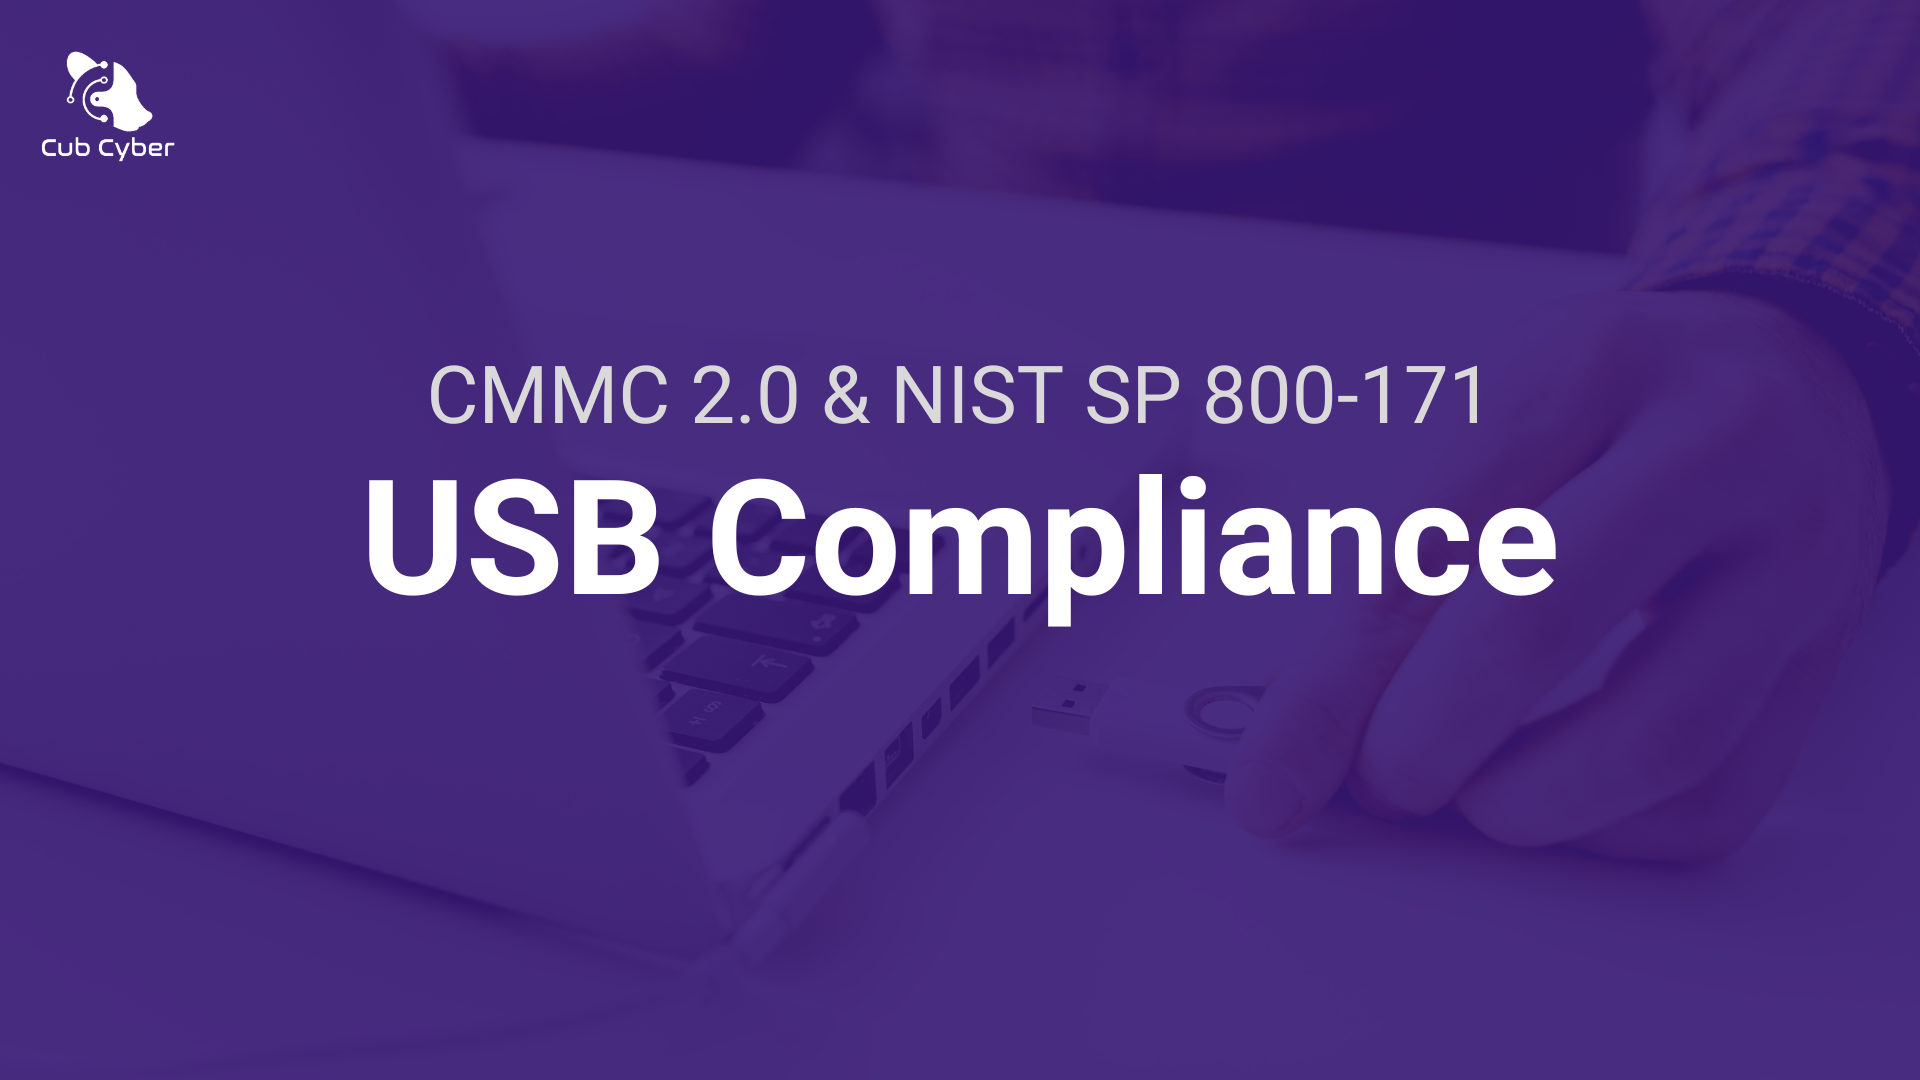 USB Compliance for NIST 800-171 and CMMC